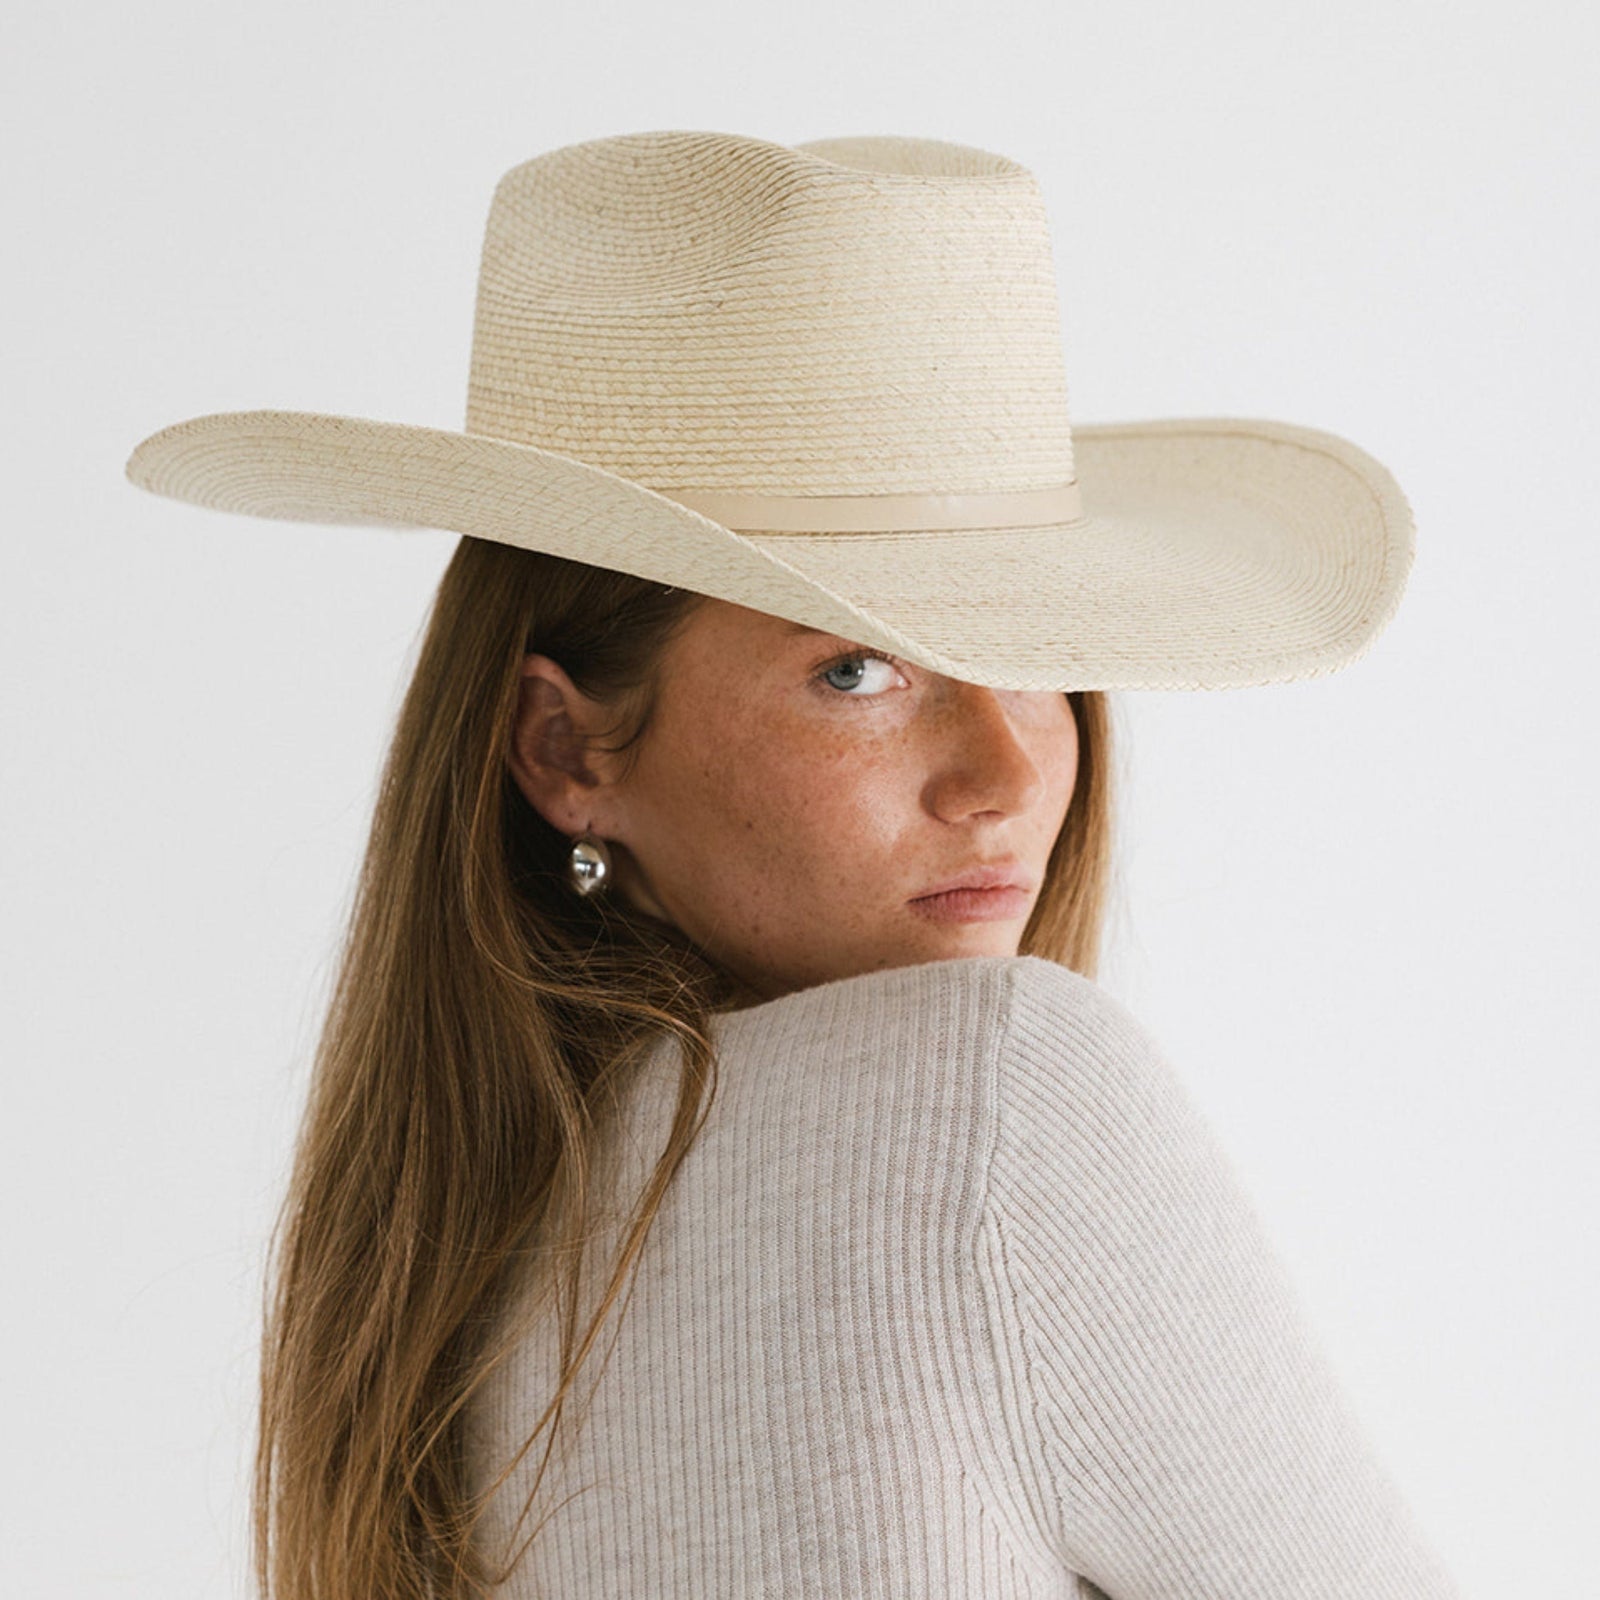 Straw Hats for Men - Fedoras, Ranchers & More at Two Roads Hat Co.